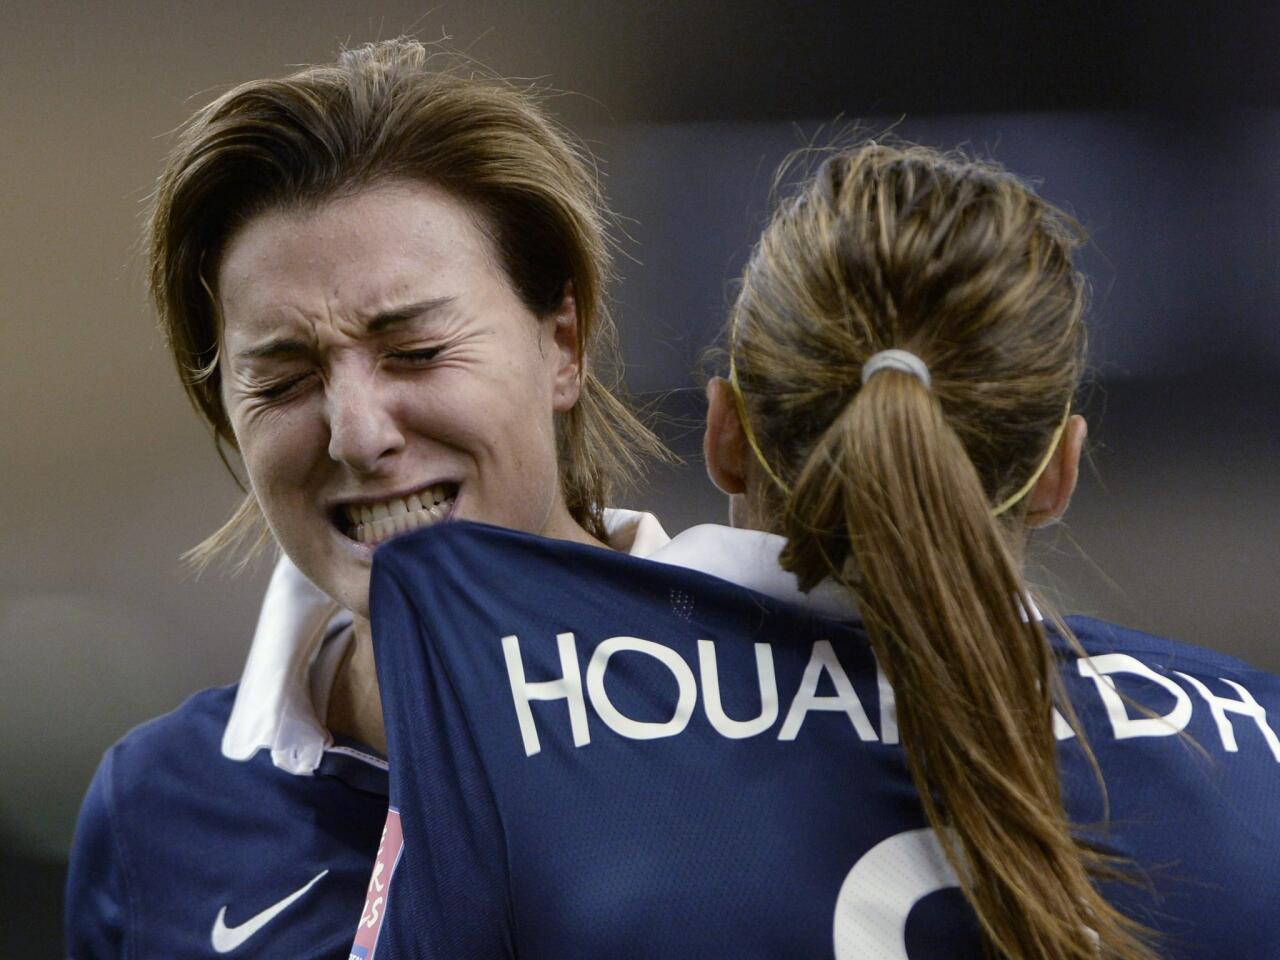 France's Claire Lavogez, left, reacts after missing a shot against Germany during the penalty-kick shootout in a quarterfinal match in the FIFA Women's World Cup soccer tournament, Friday, June 26, 2015, in Montreal, Canada. (Ryan Remiorz/The Canadian Press via AP)